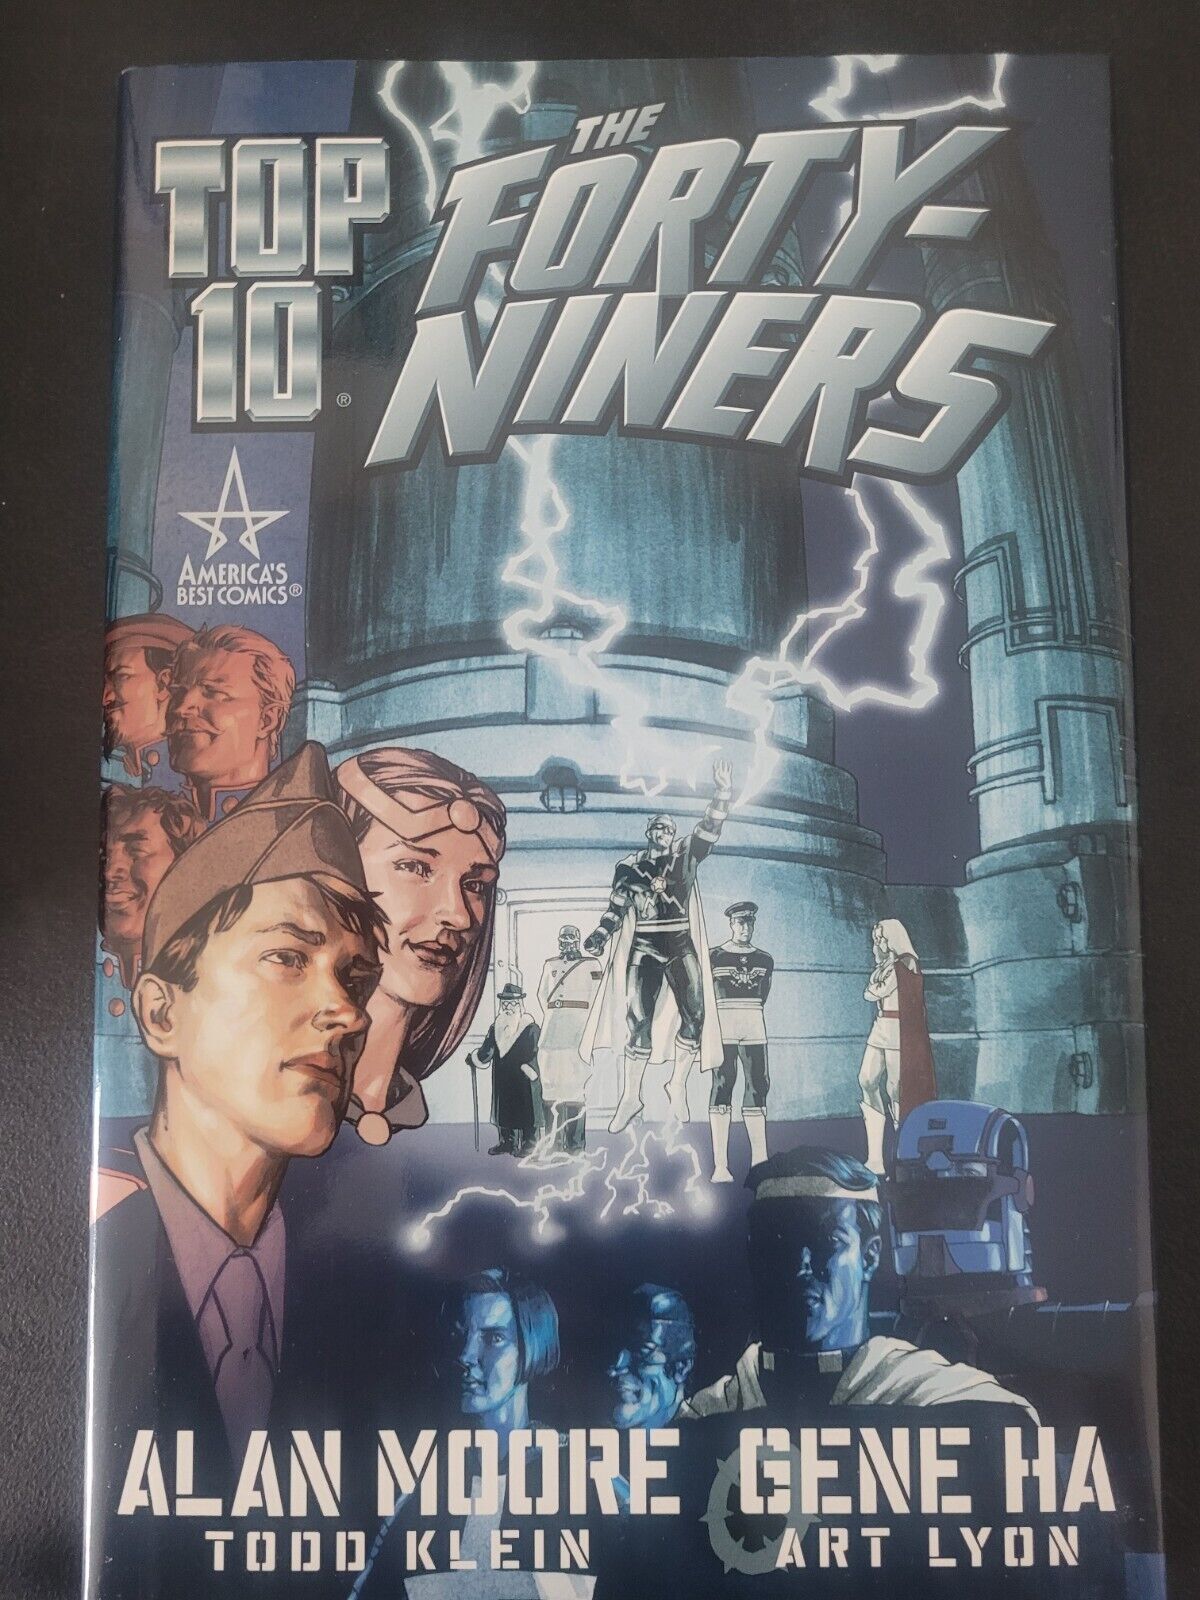 TOP 10 THE FORTY NINERS HARDCOVER GRAPHIC NOVEL ABC COMICS ALAN MOORE NEW UNREAD